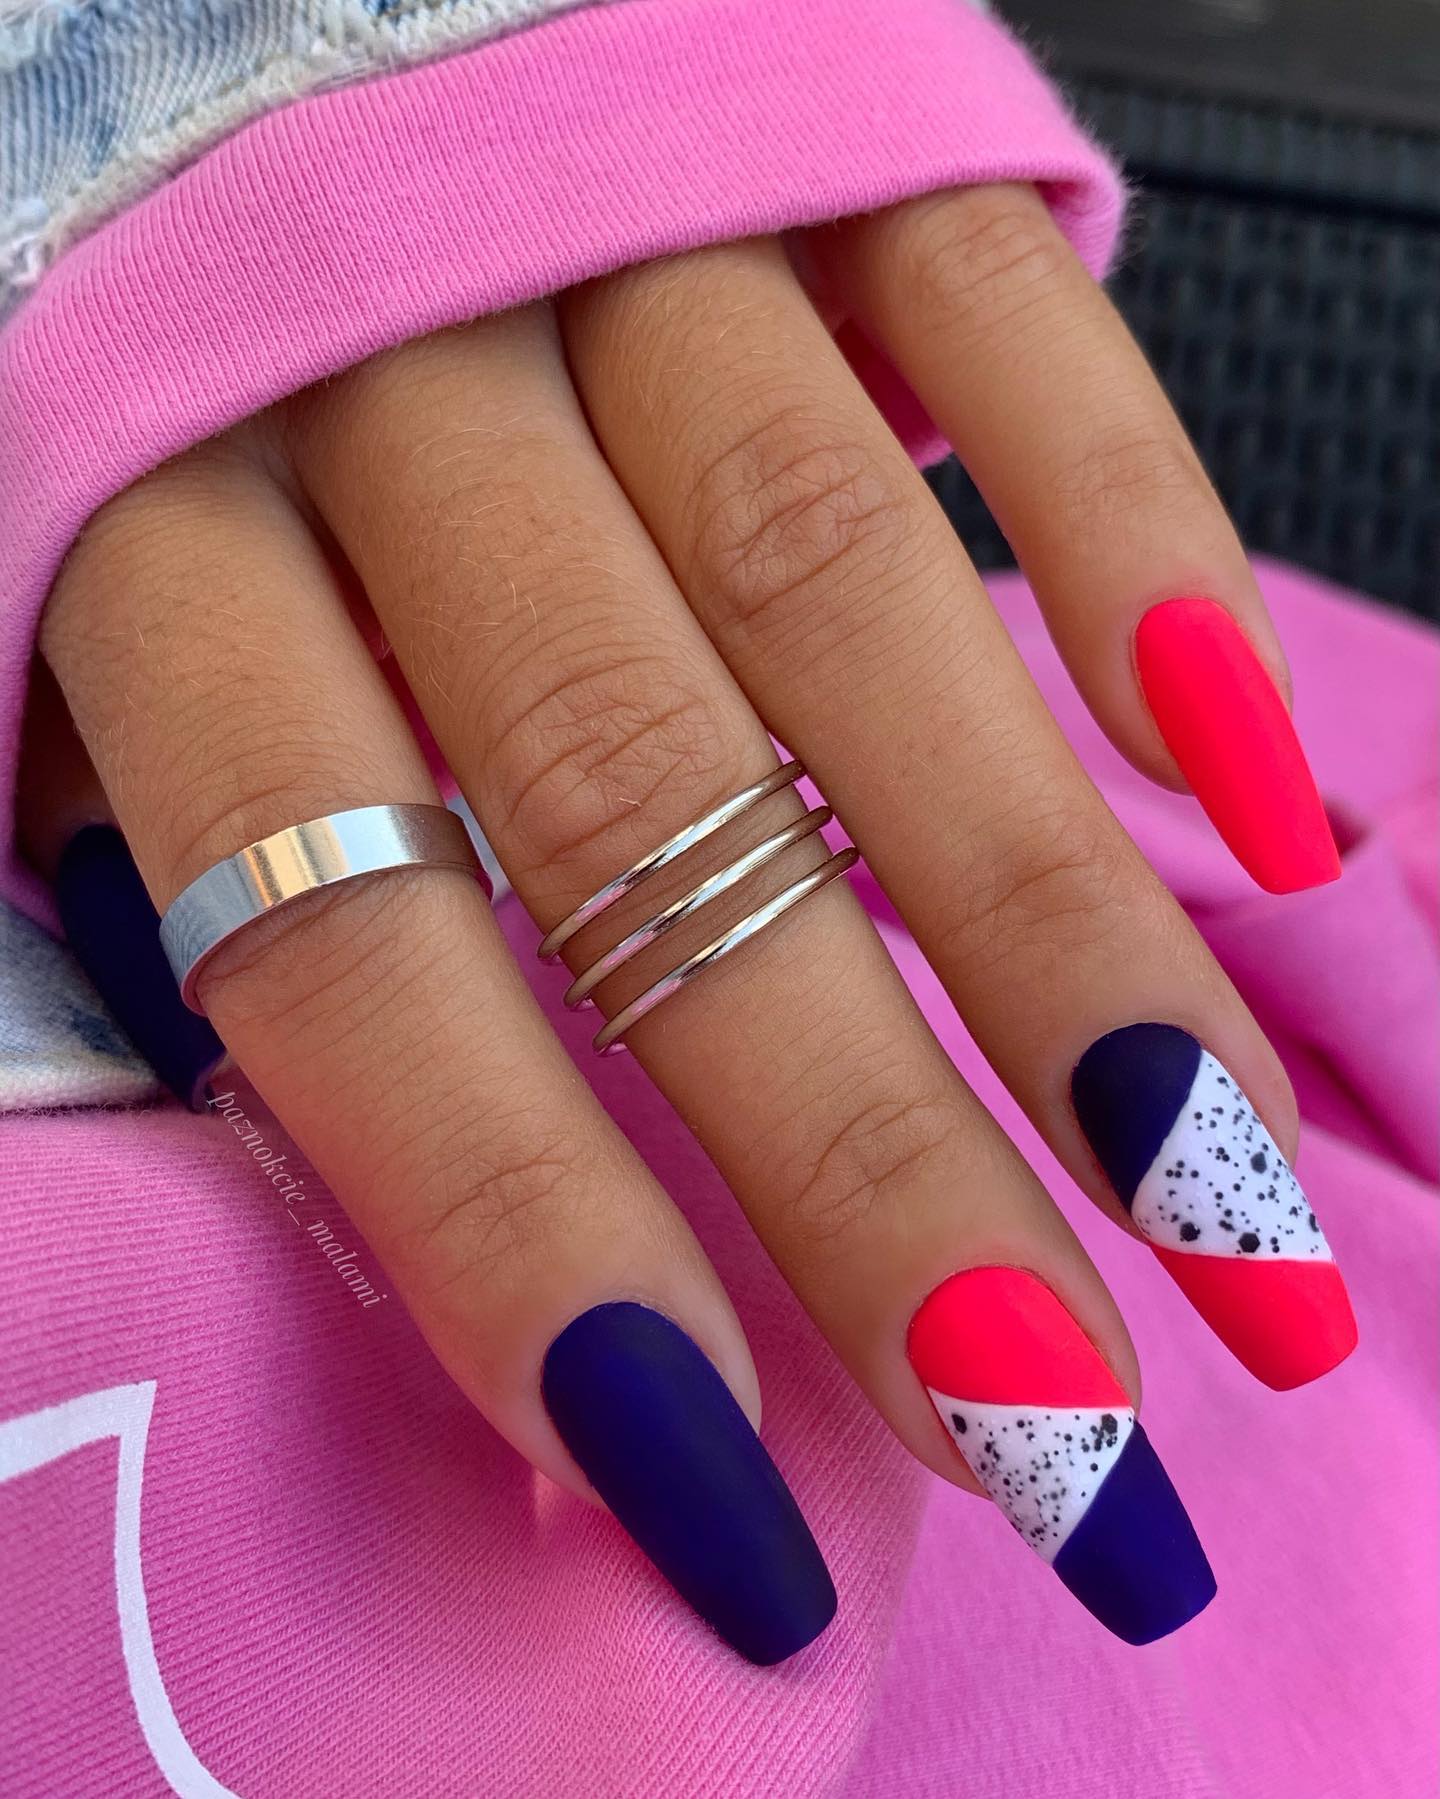 Long Dark Blue Nails with Red and White Geometric Design